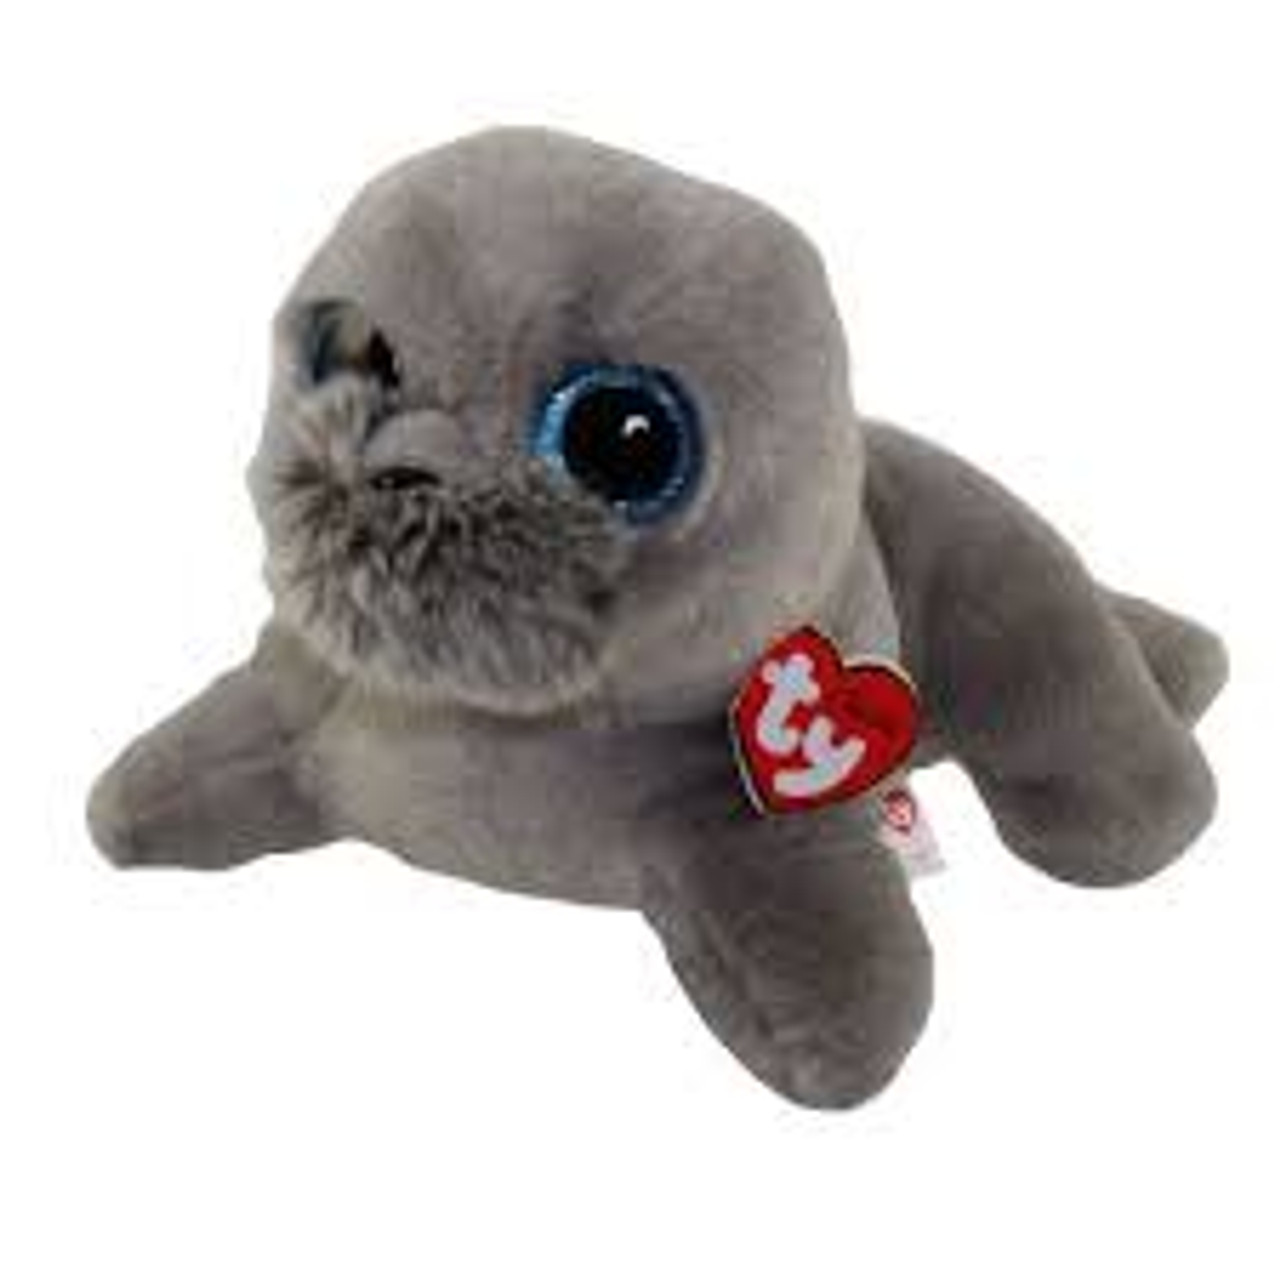 Wiggy The Sea Lion for 2016 Very Cute in Hand for sale online Ty Beanie Baby 